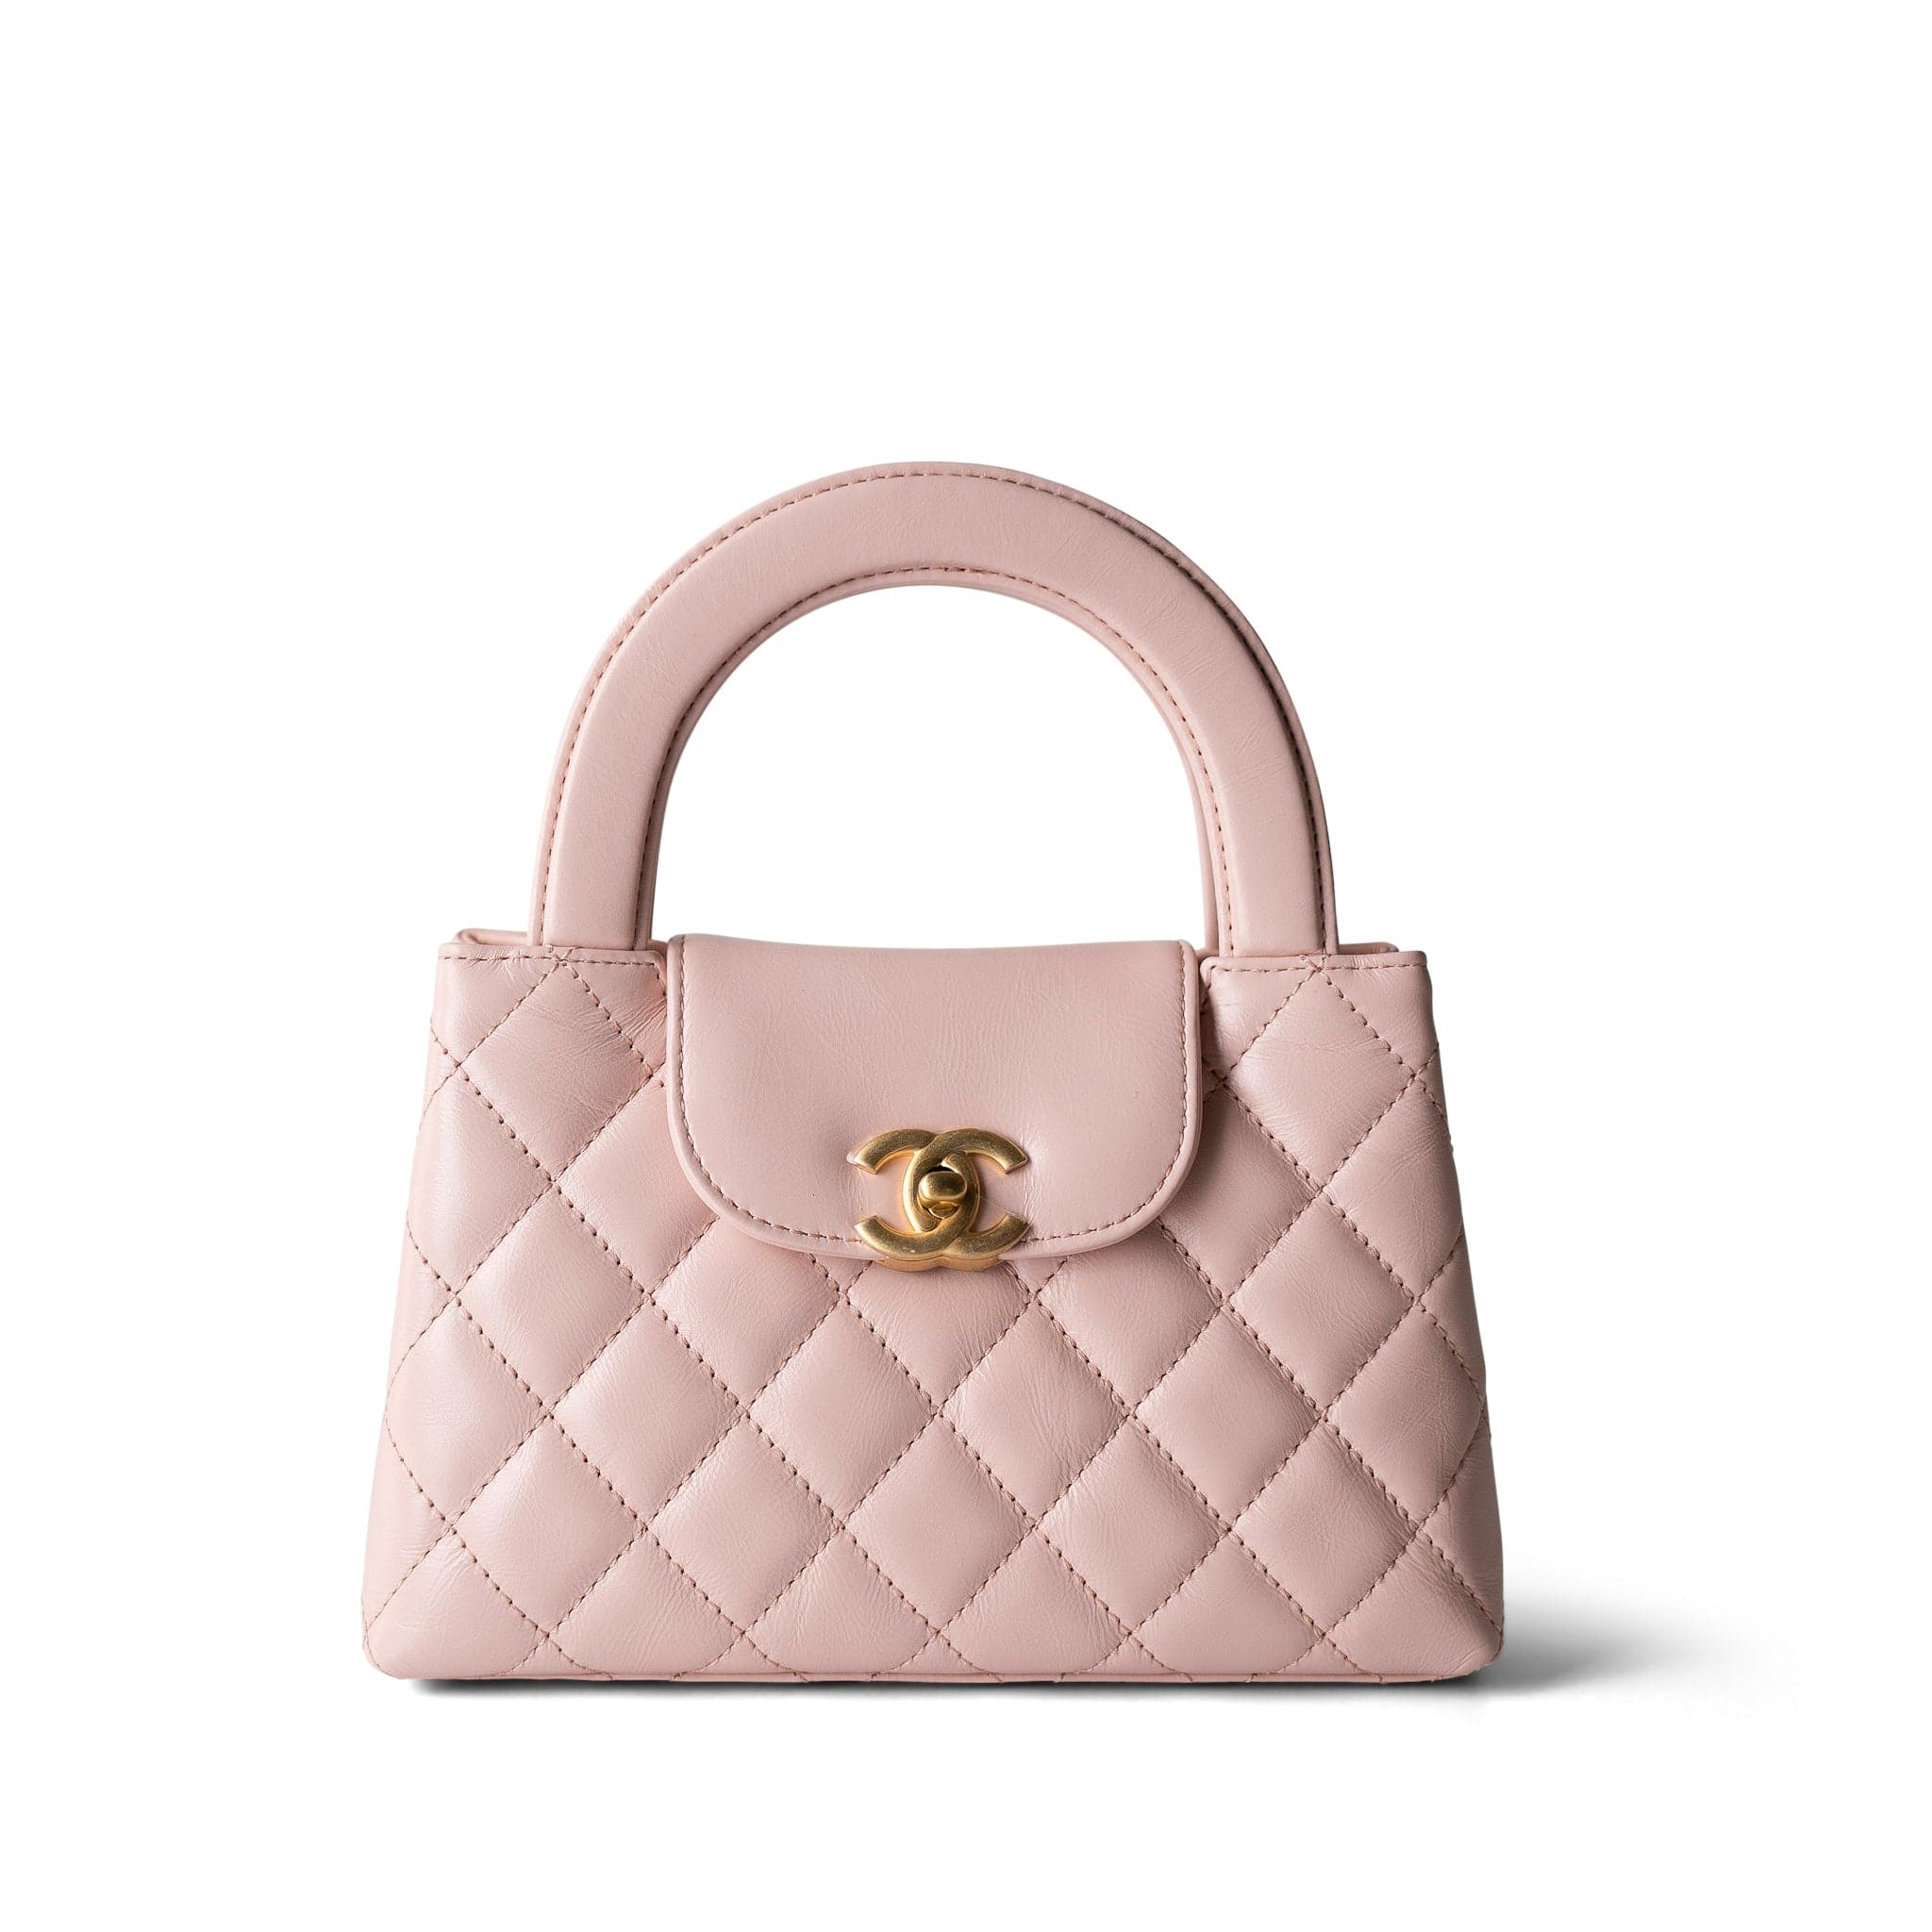 CHANEL Handbag Pink Shiny Aged Calfskin Quilted Nano Kelly Shopper Light Pink - Redeluxe